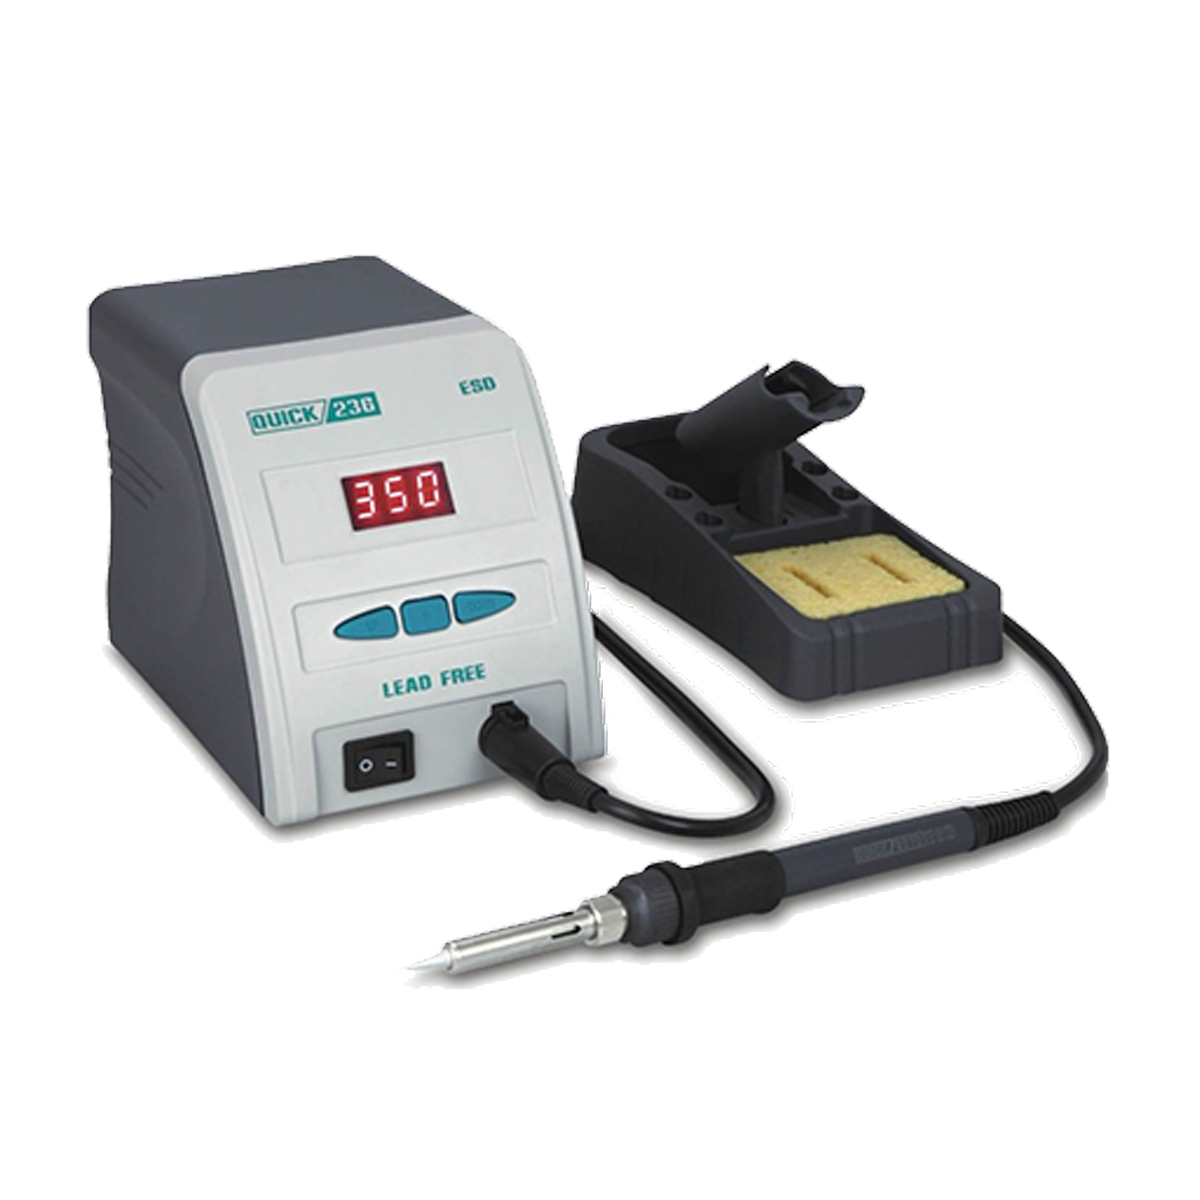 QUICK 236 SOLDERING STATION